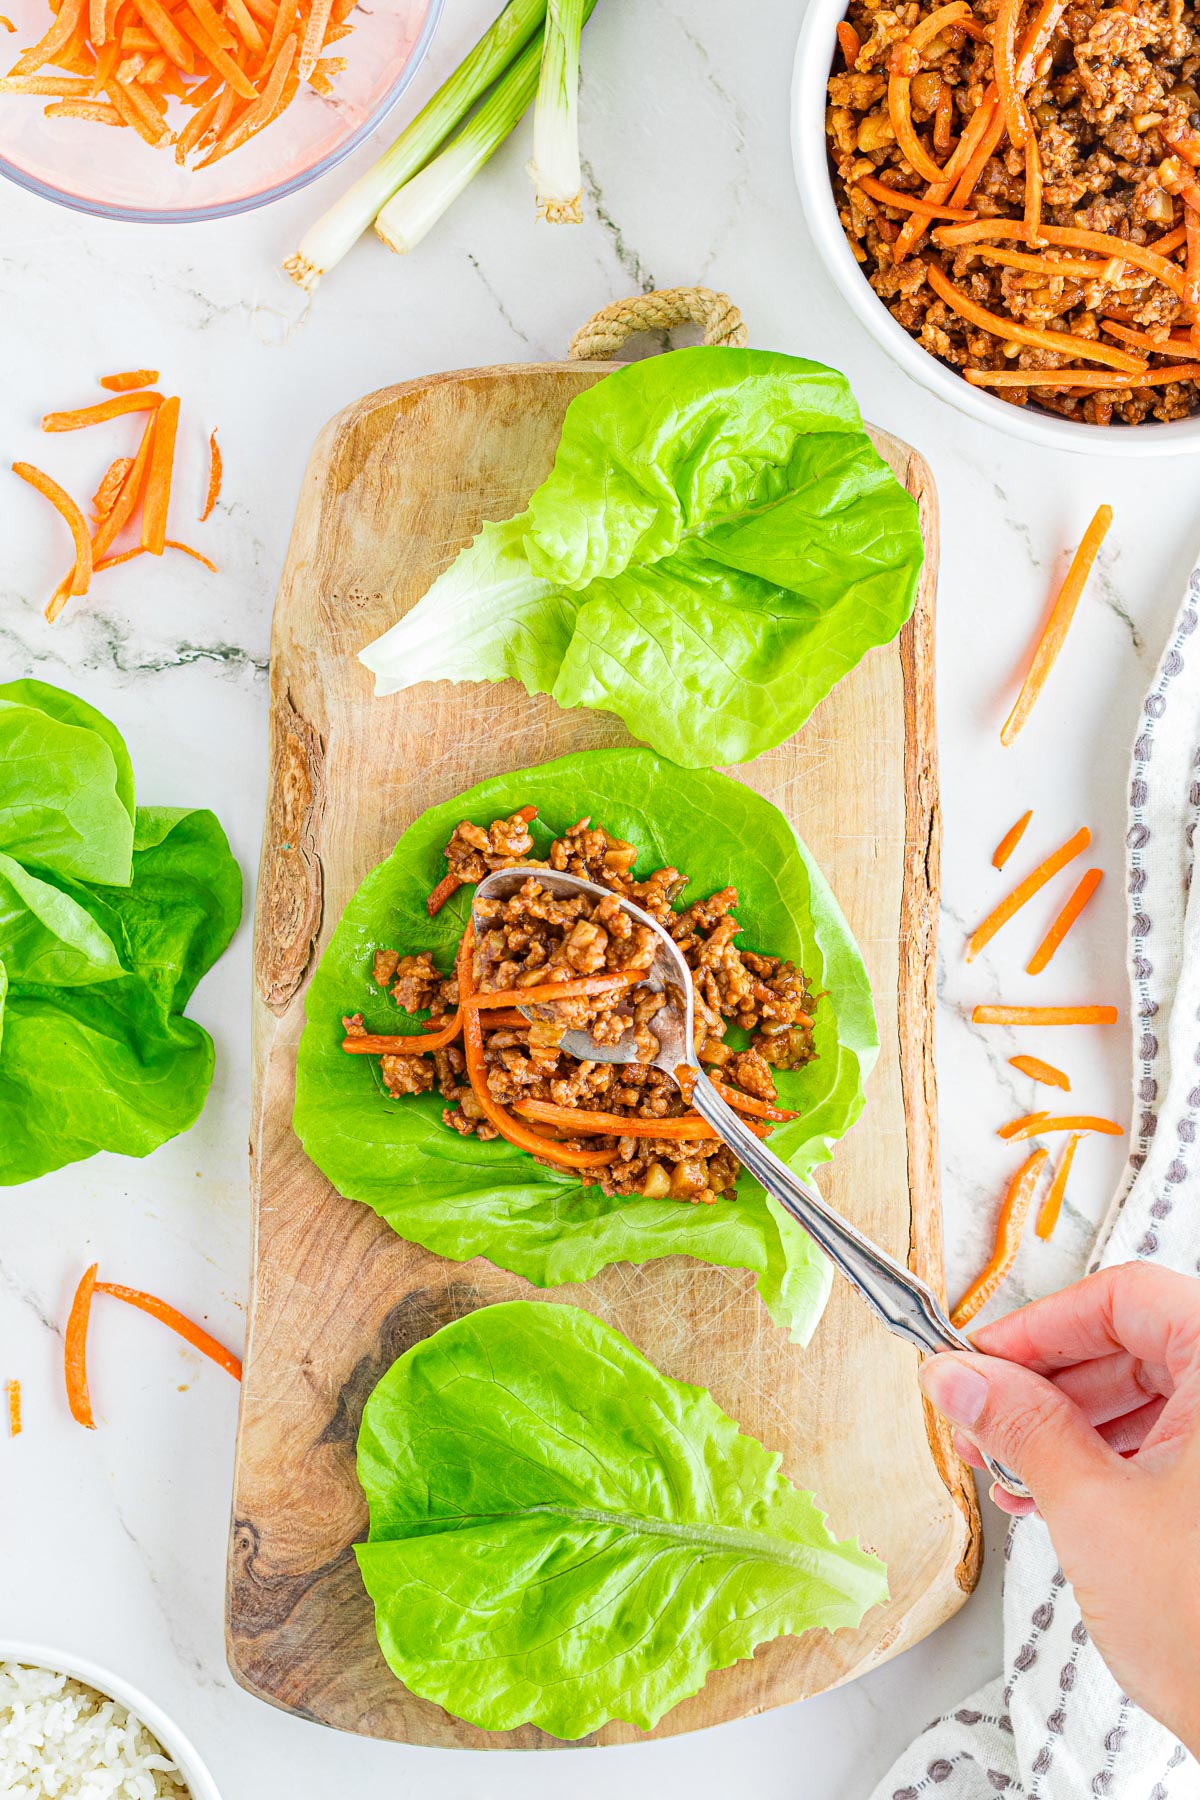 A hand filling asian-style pork lettuce wraps wwith ground pork and vegetables being spooned into lettuce pieces on a wooden cutting board.